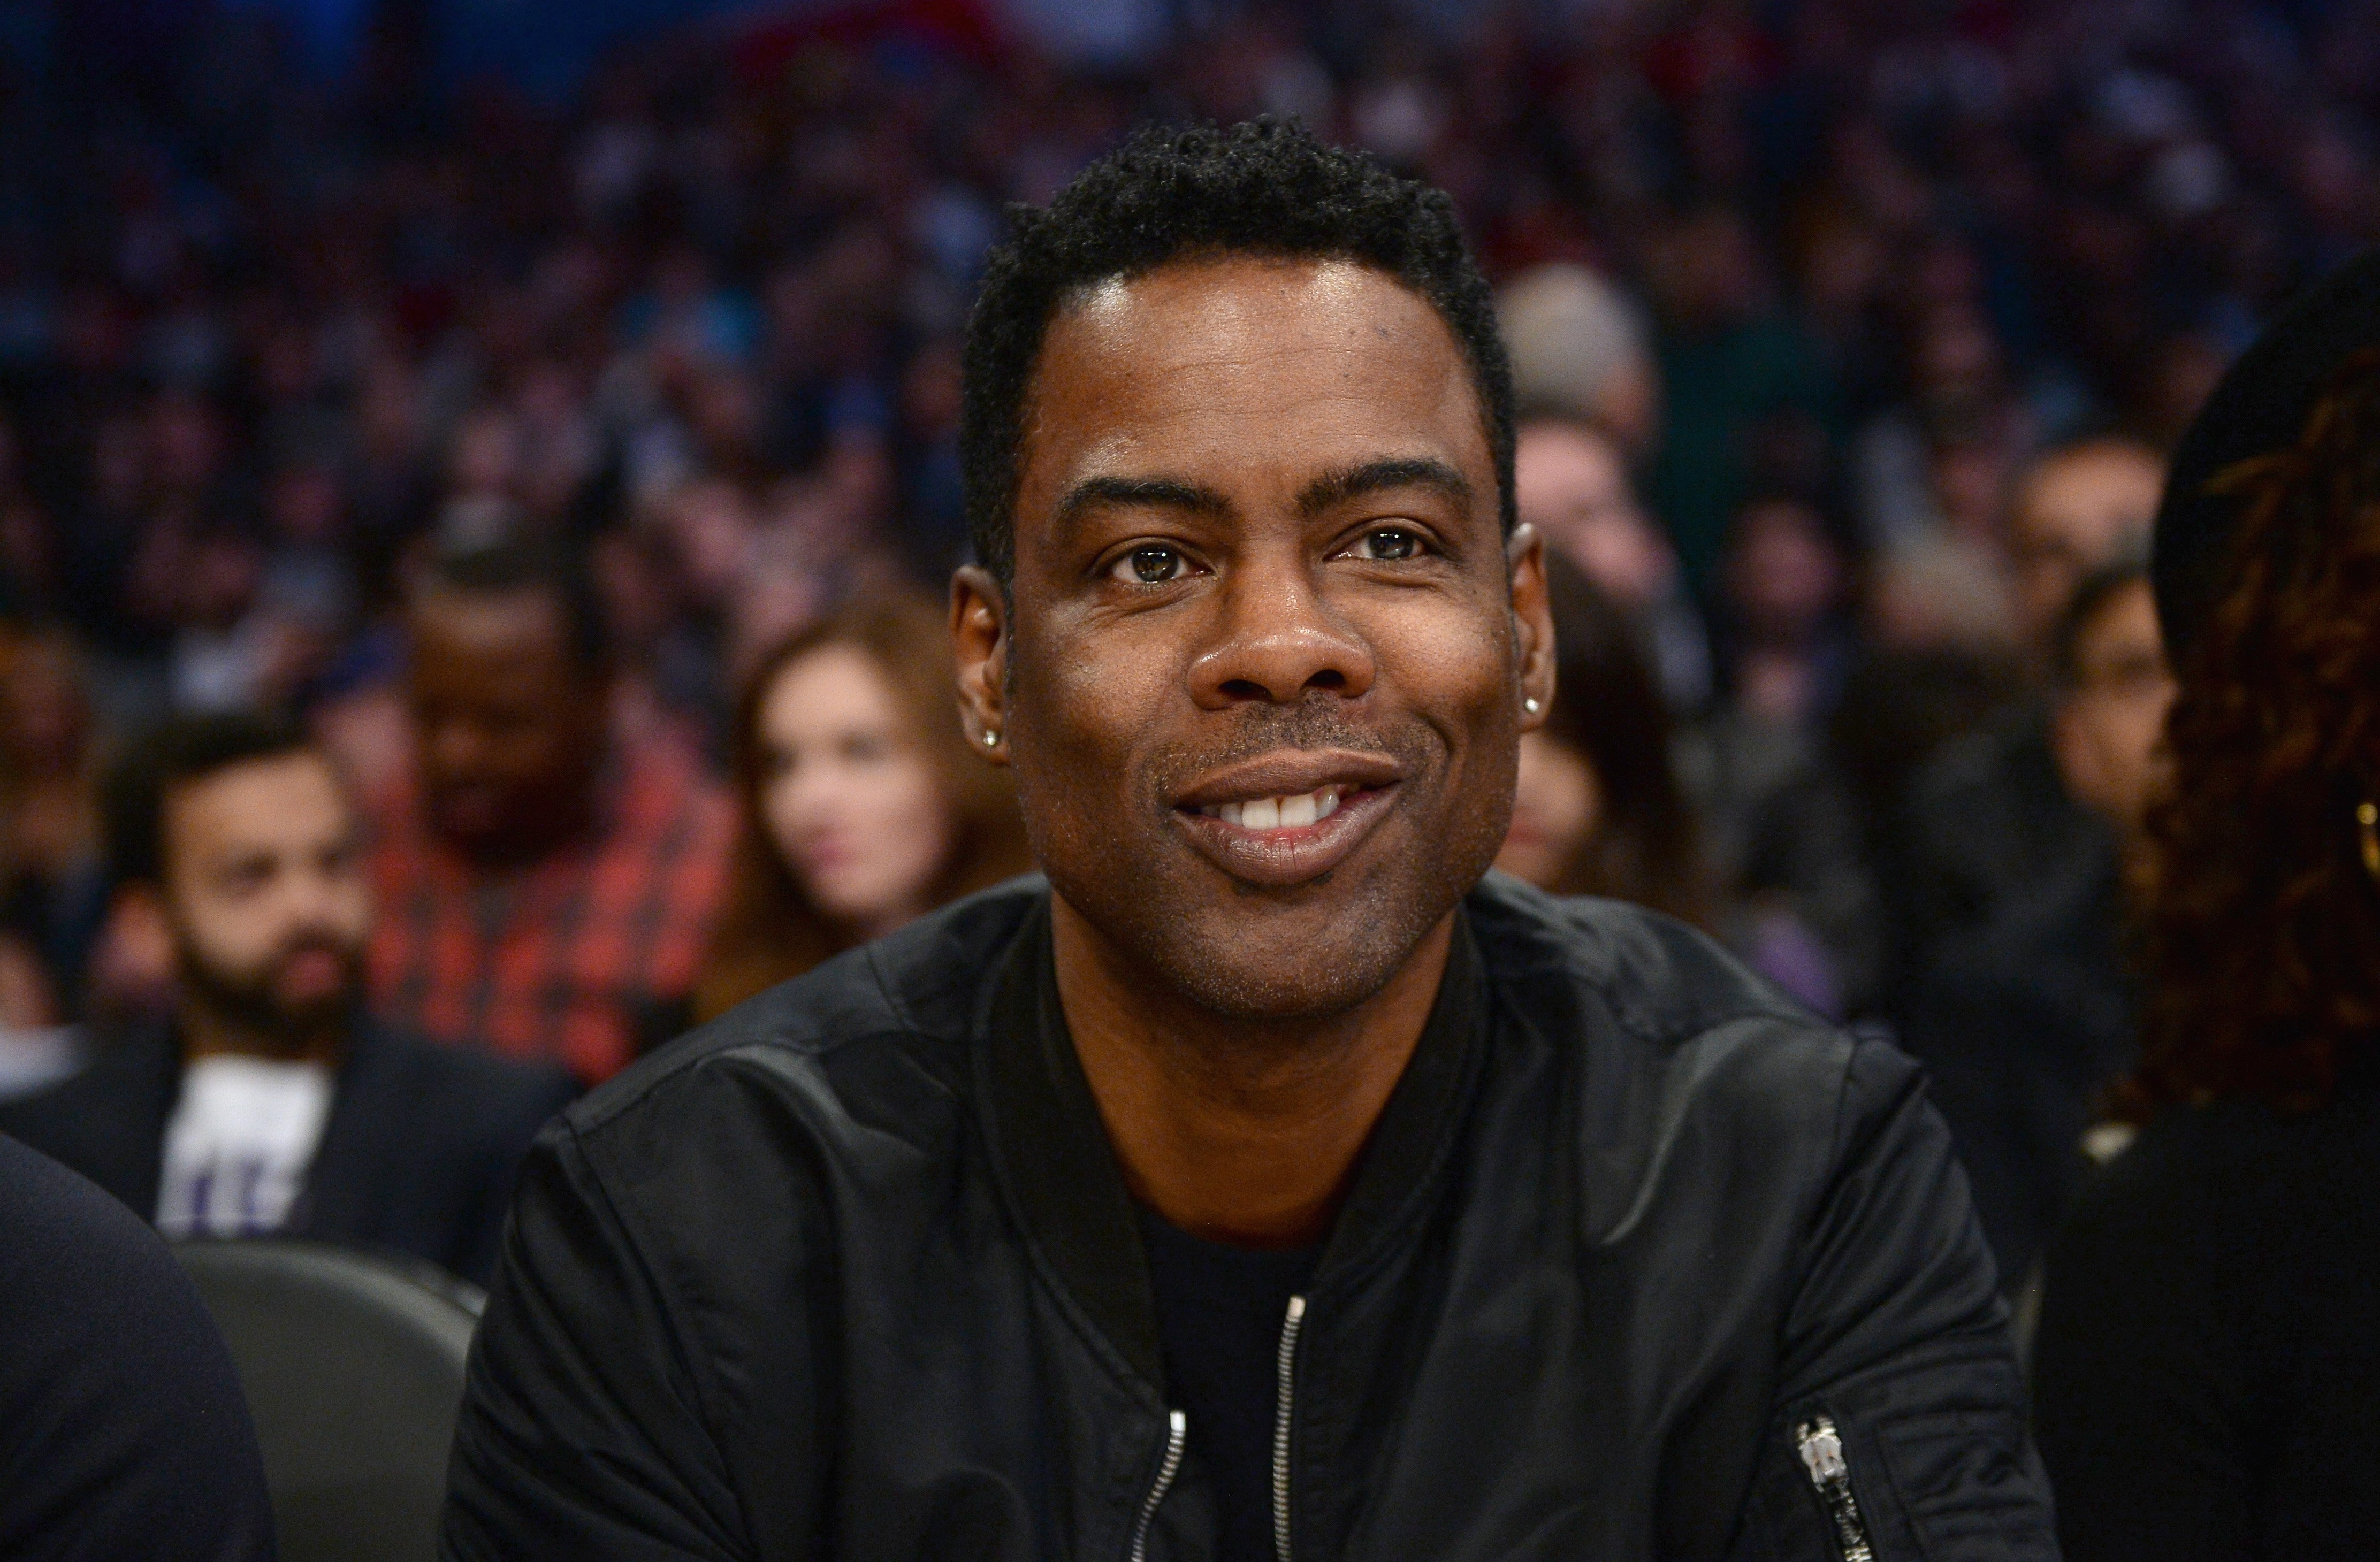 Chris Rock attends during the NBA All-Star Game 2018 at Staples Center on February 18, 2018 in Los Angeles, California. | Source: Getty Images